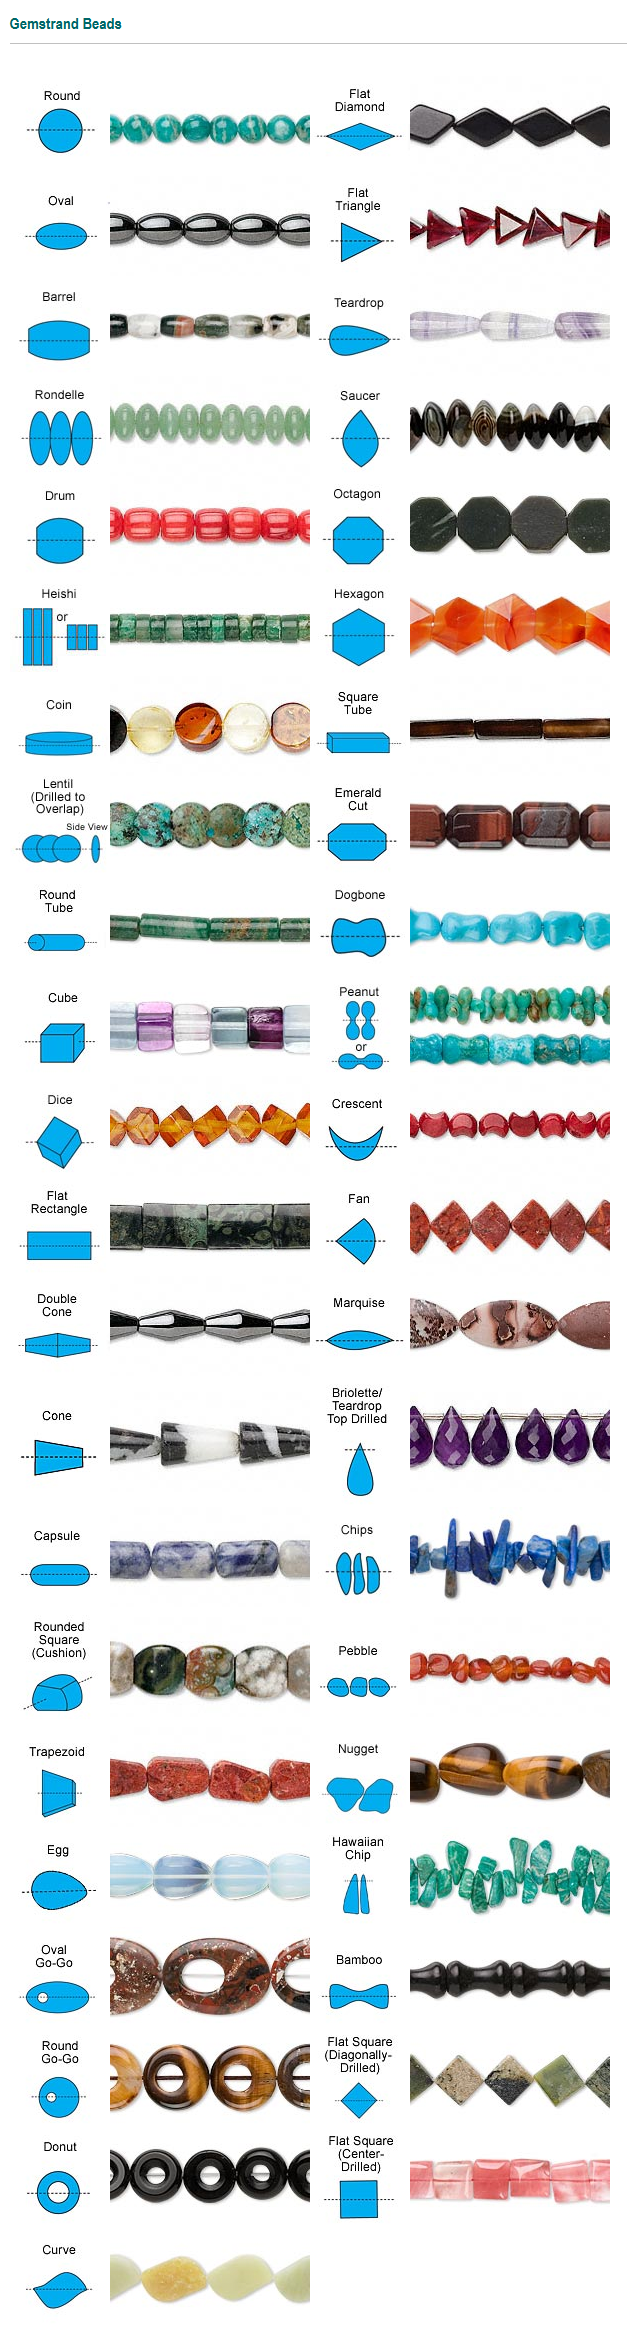 (from the Encyclo-BEADia) Shape Chart – Gemstone, Coral and Pearl Beads | via FireMountainGems.com